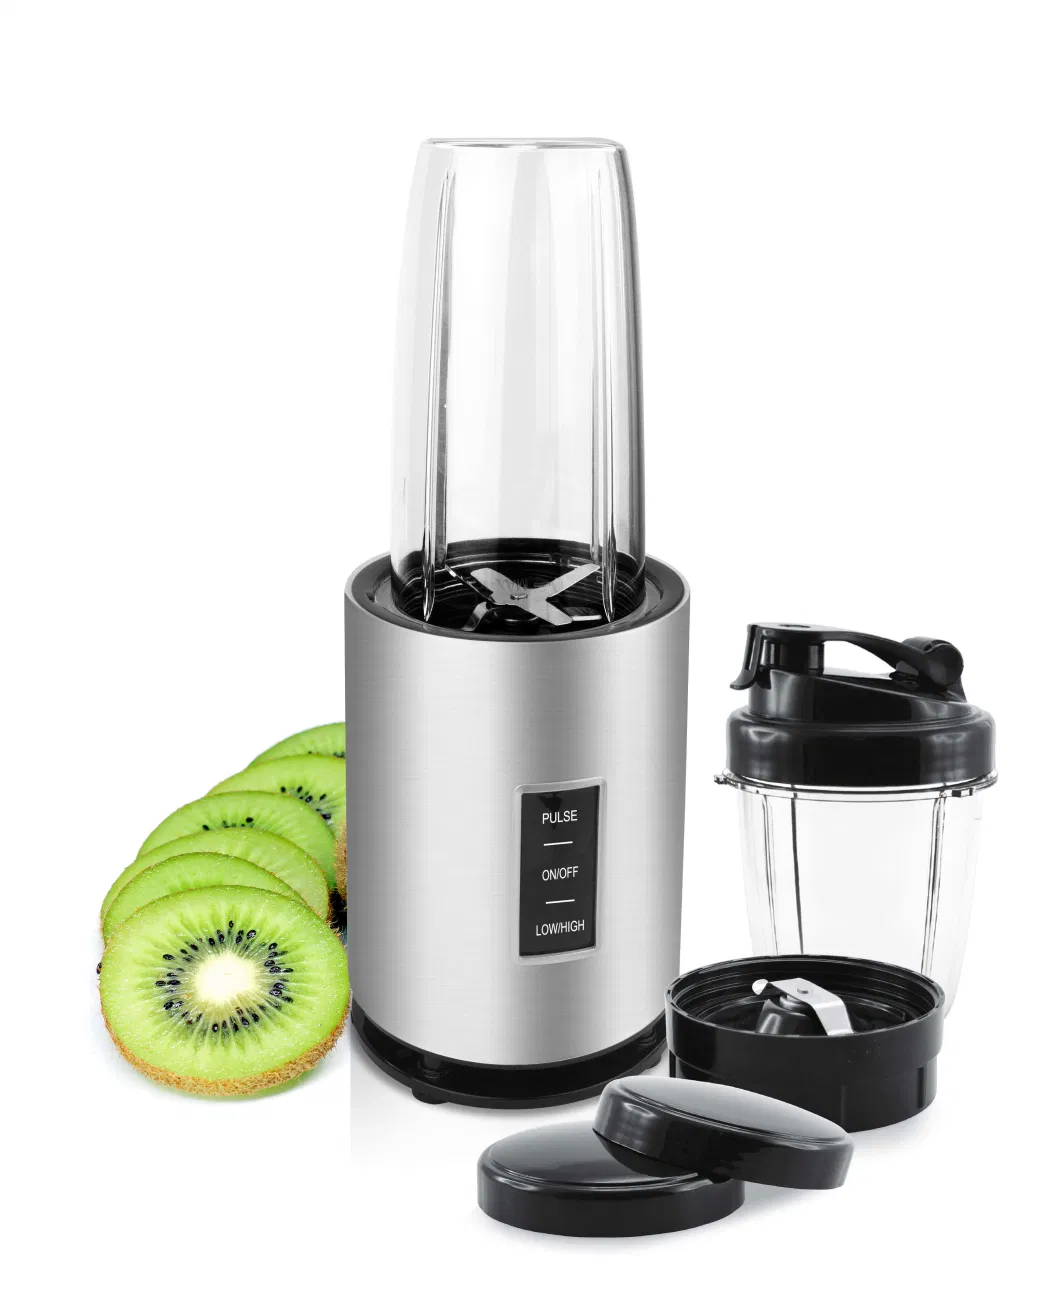 Home Use Kitchen Appliance Automatic Portable Mini Food Processor Blender